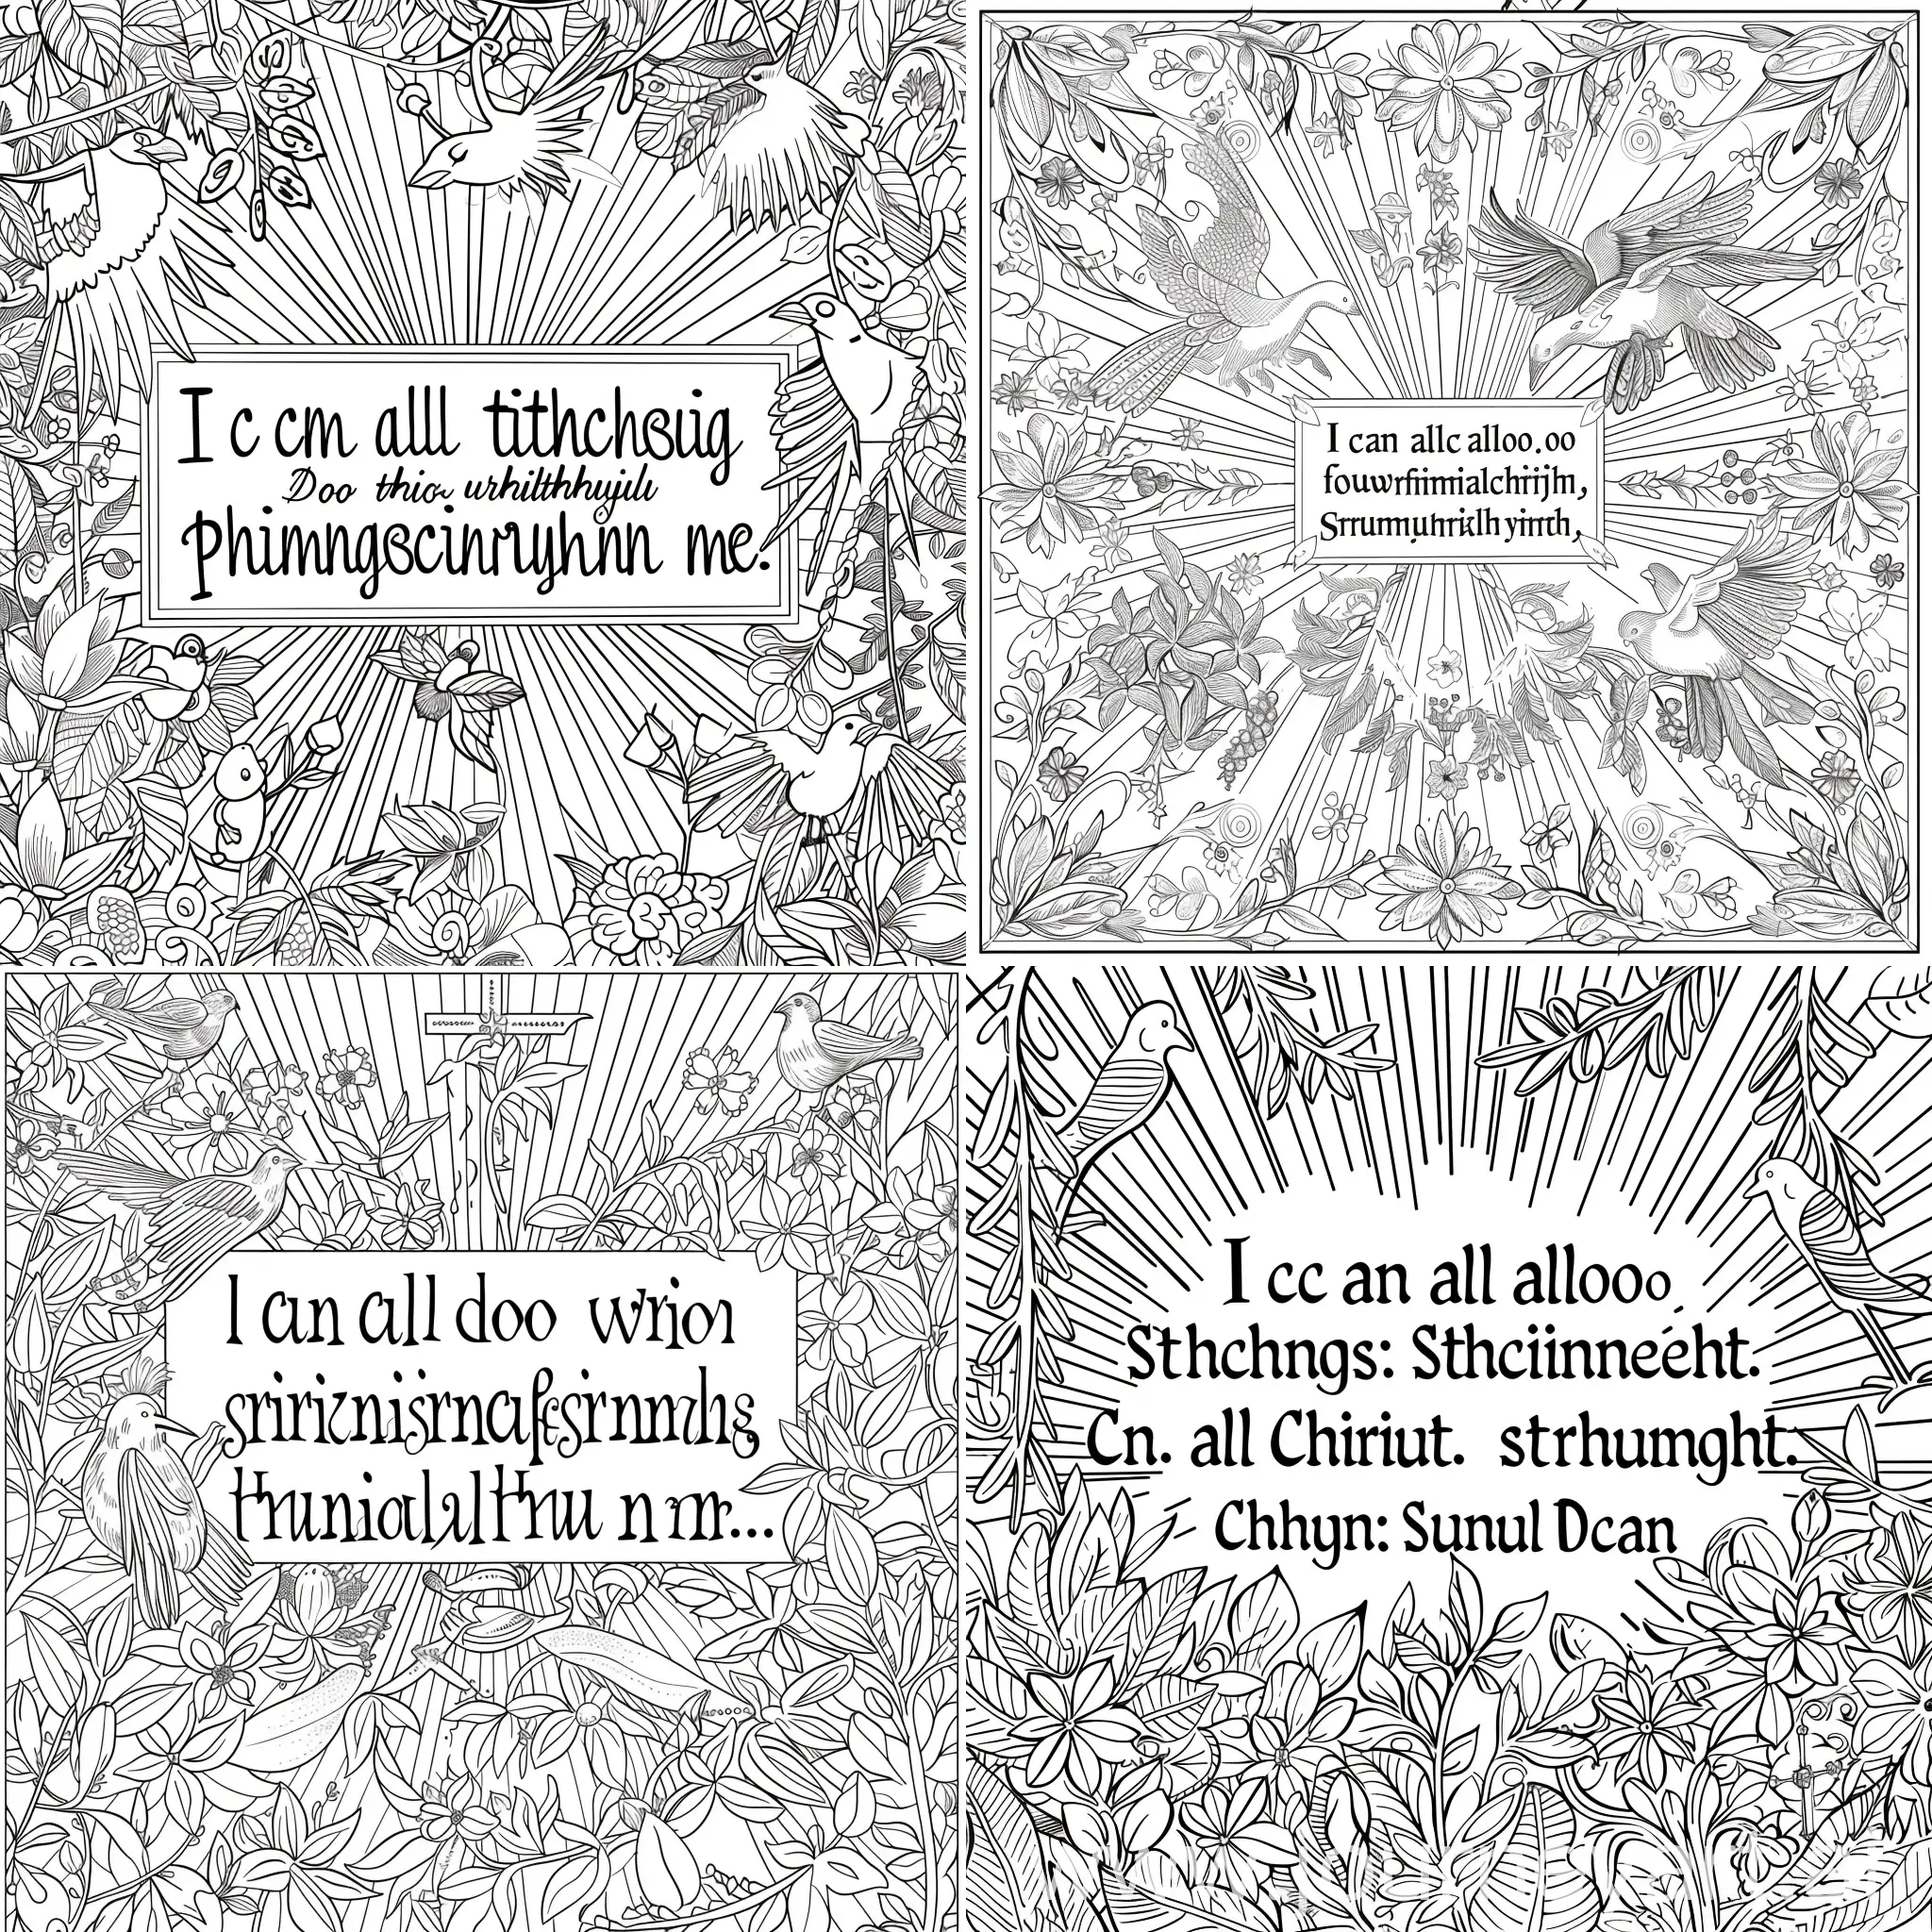 Inspirational-Biblical-Coloring-Page-I-Can-Do-All-Things-Through-Christ